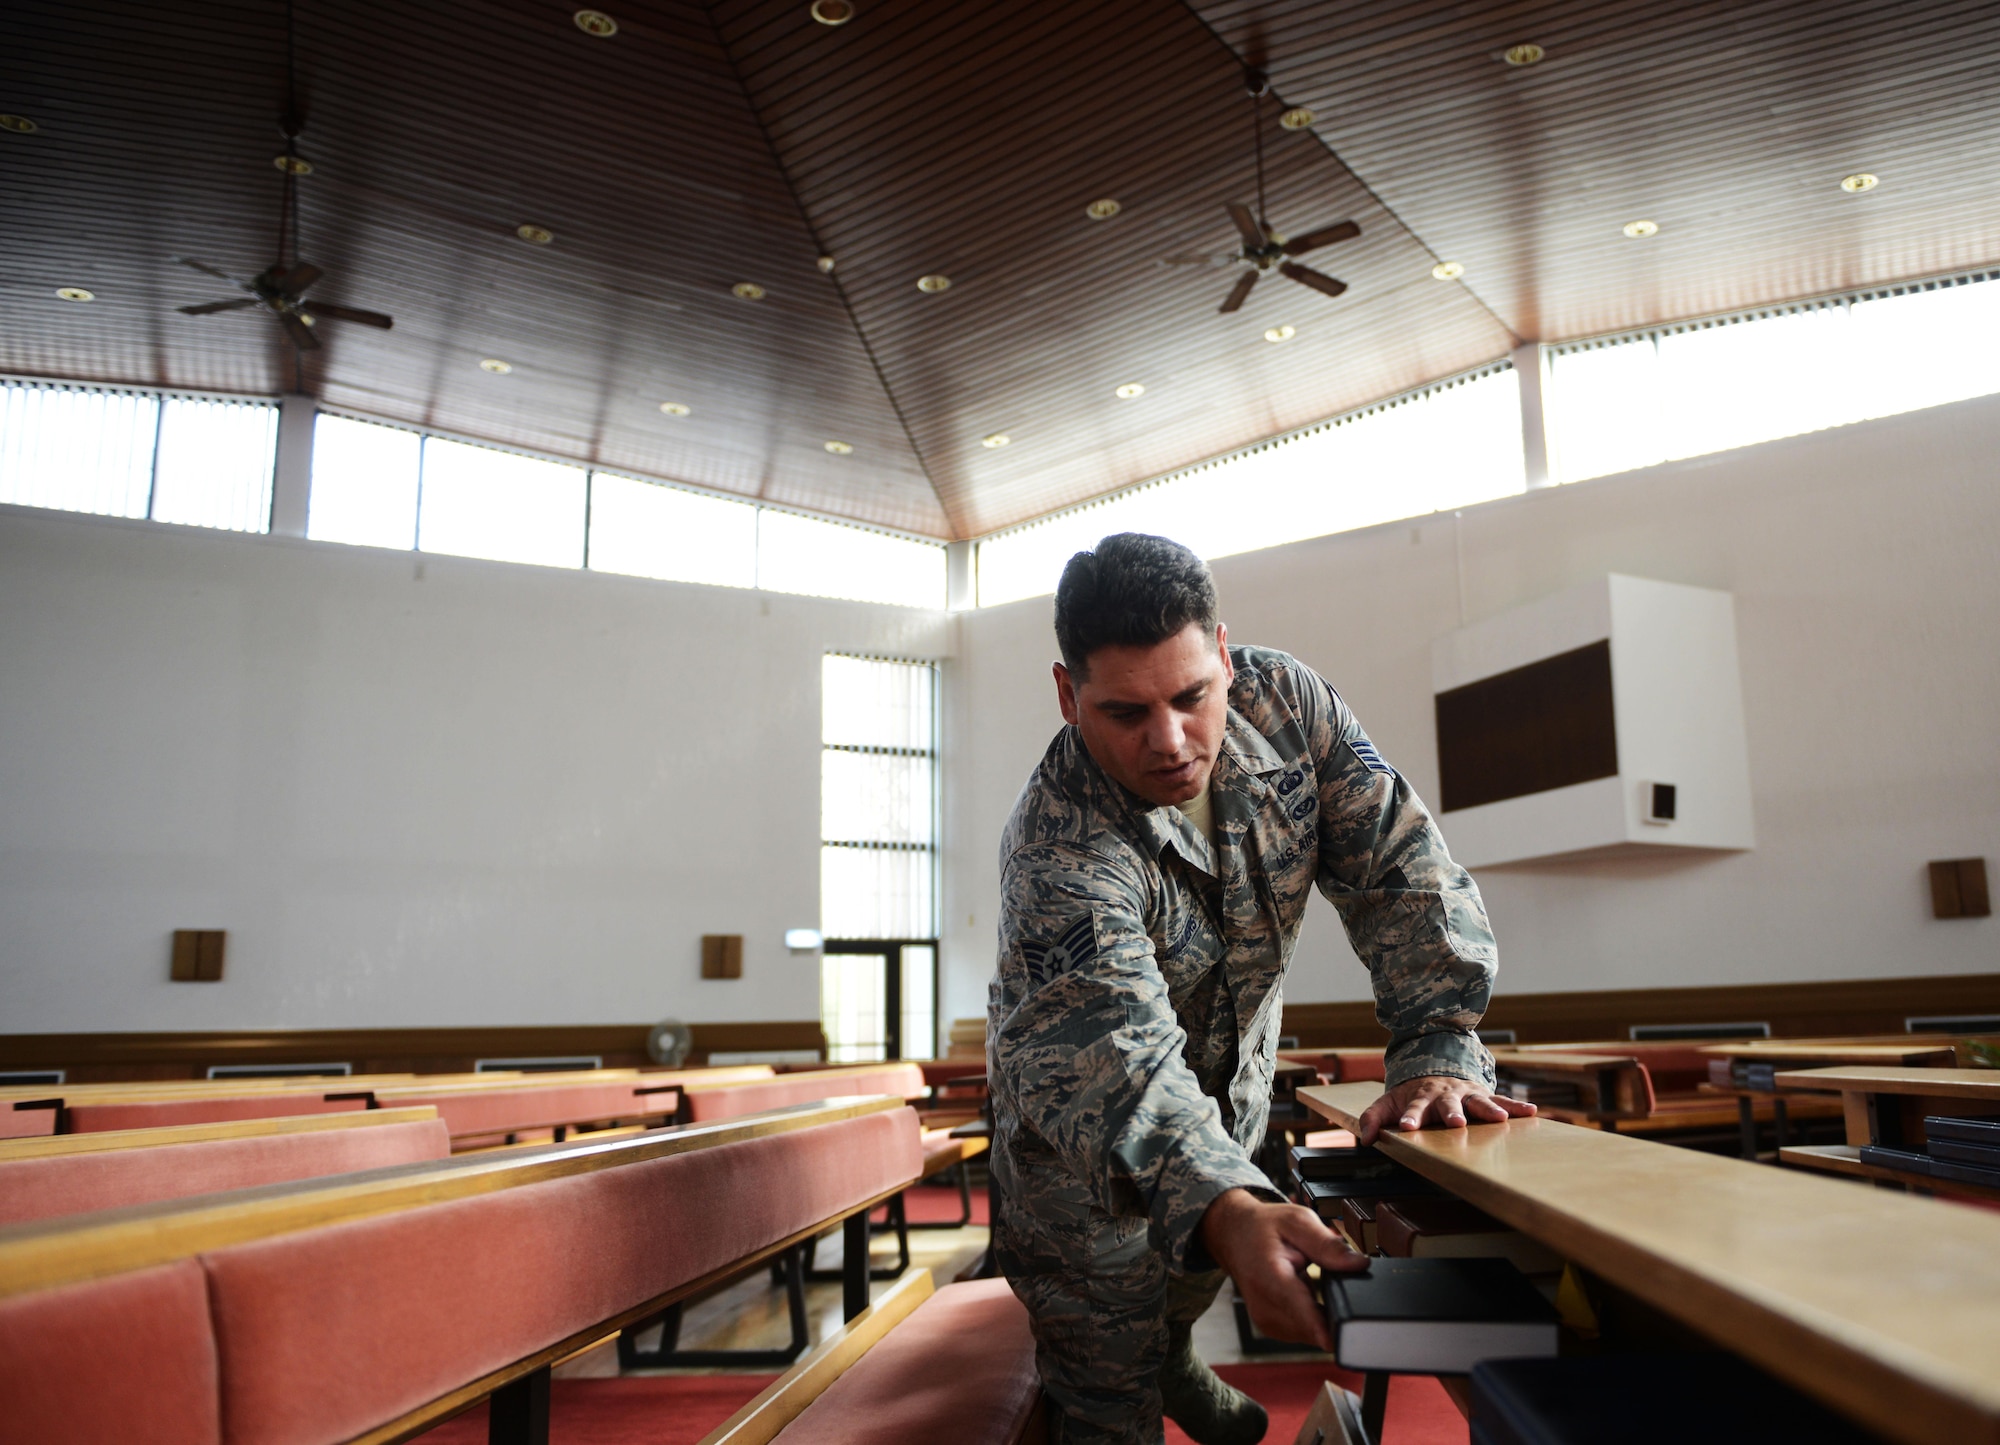 Staff Sgt. Johannes Cilliers, 86th Airlift Wing chaplain assistant, sets up a chapel for a religious service at Ramstein Air Base, Germany, Sept. 30, 2016. The Ramstein chapel community provides religious and counseling services to all Airmen, whether they are religious or not. (U.S. Air Force photo/ Airman 1st Class Joshua Magbanua)